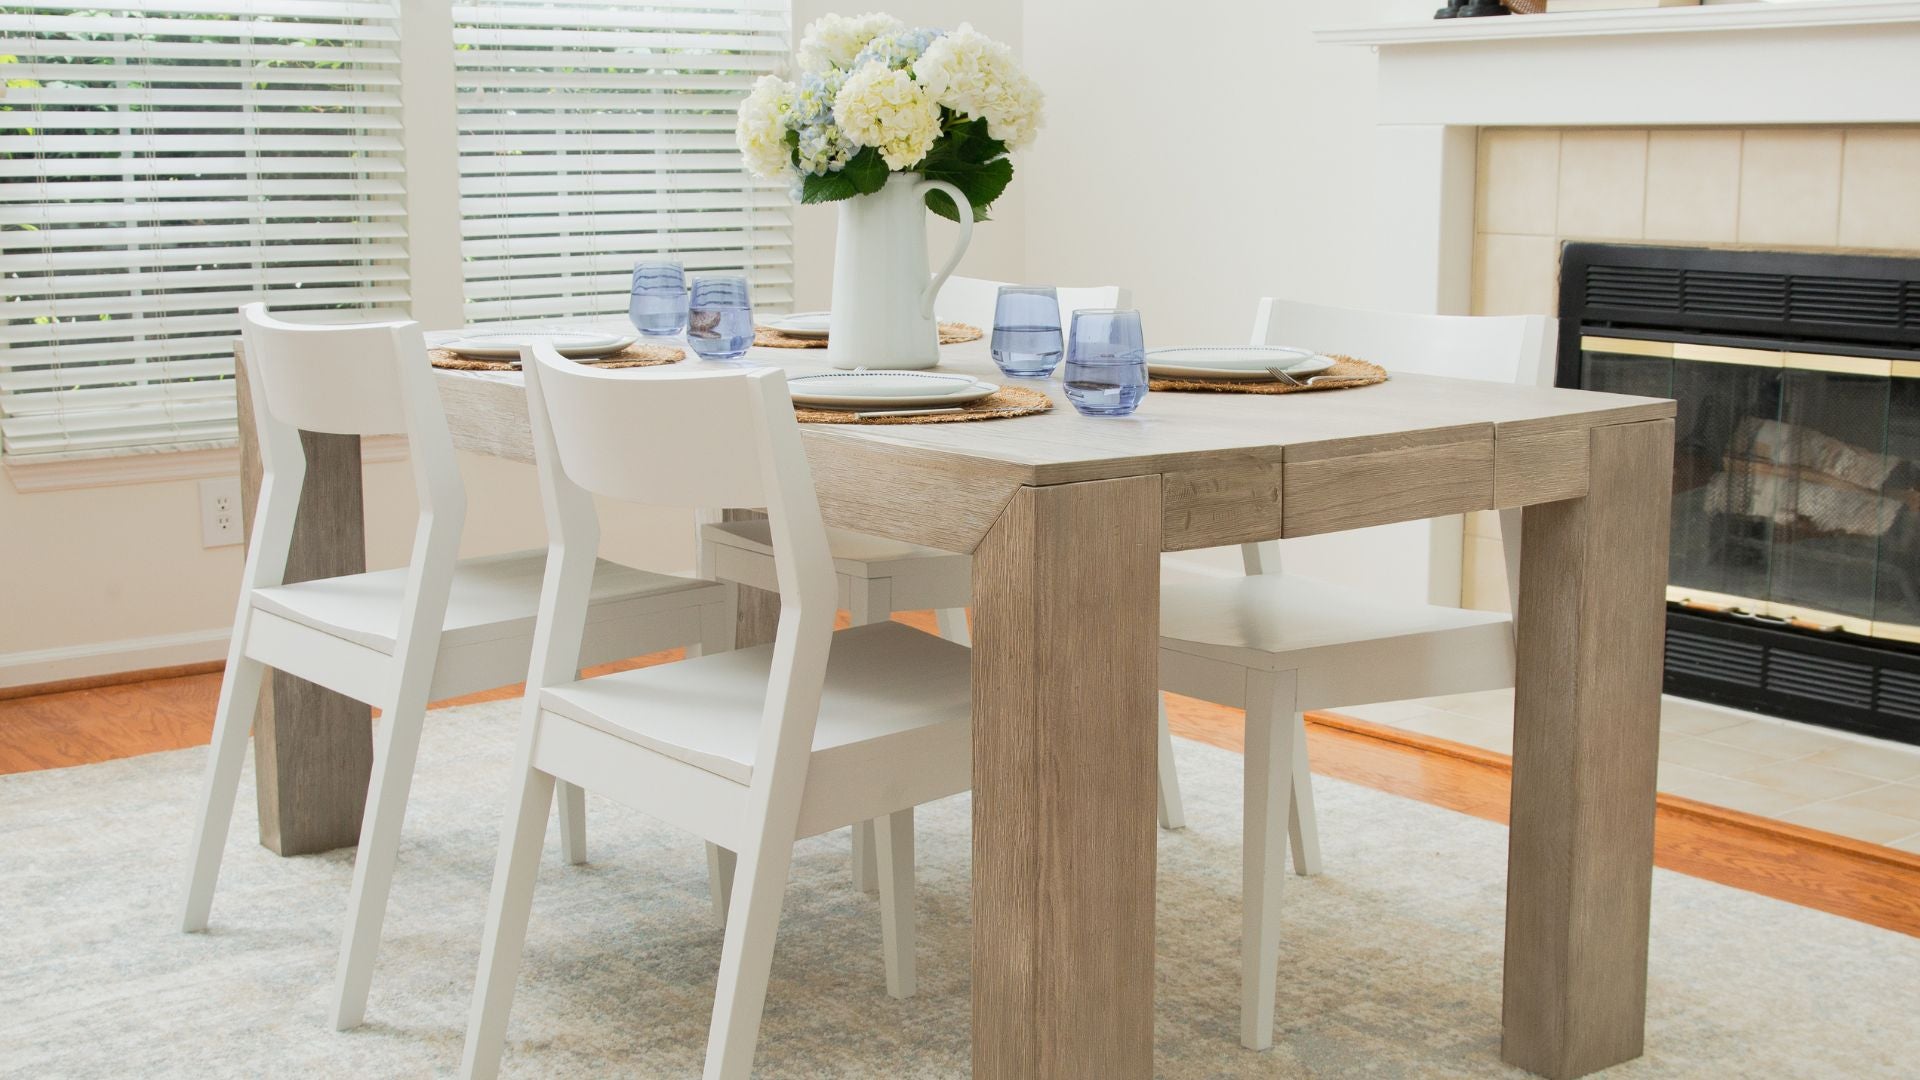 light wood dining table and white dining chairs with floral centerpiece and blue glassware